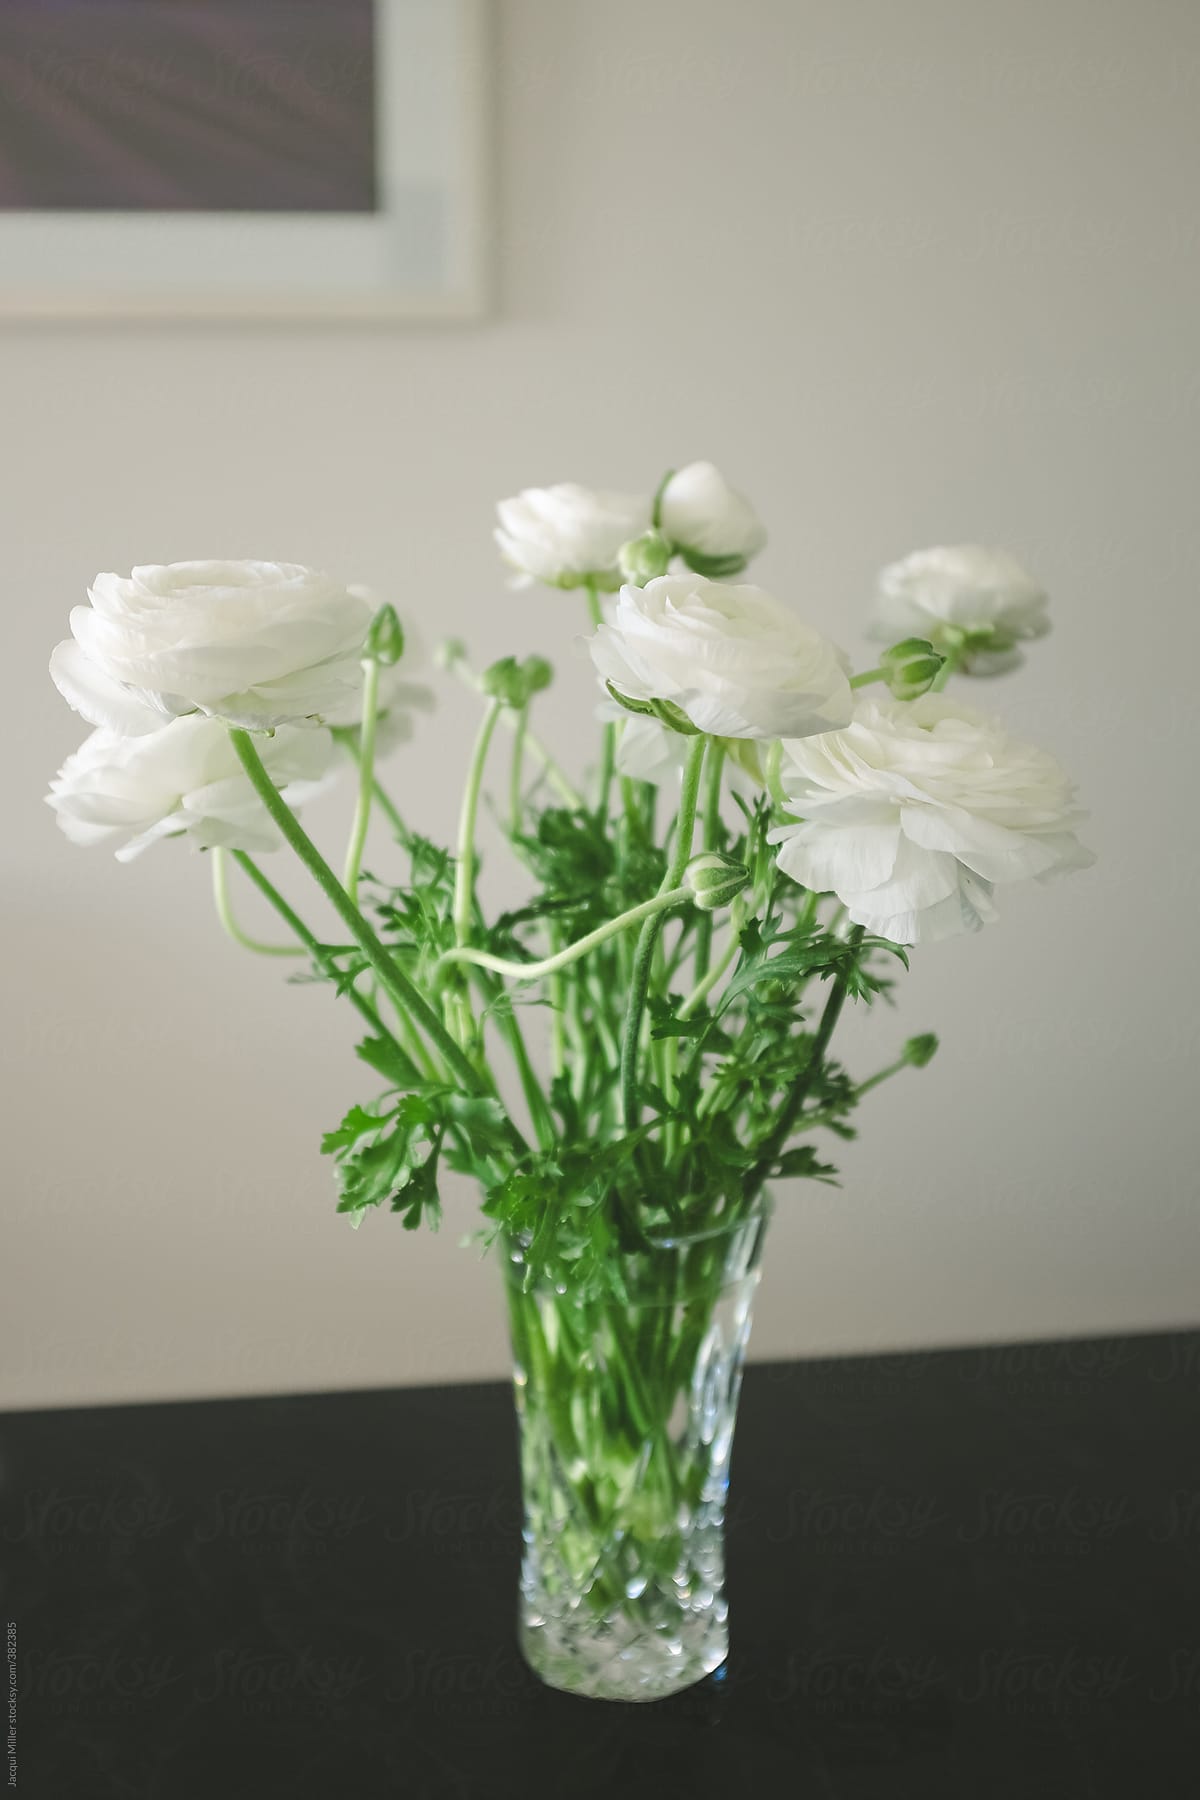 White ranunculus in a vase on a kitchen bench